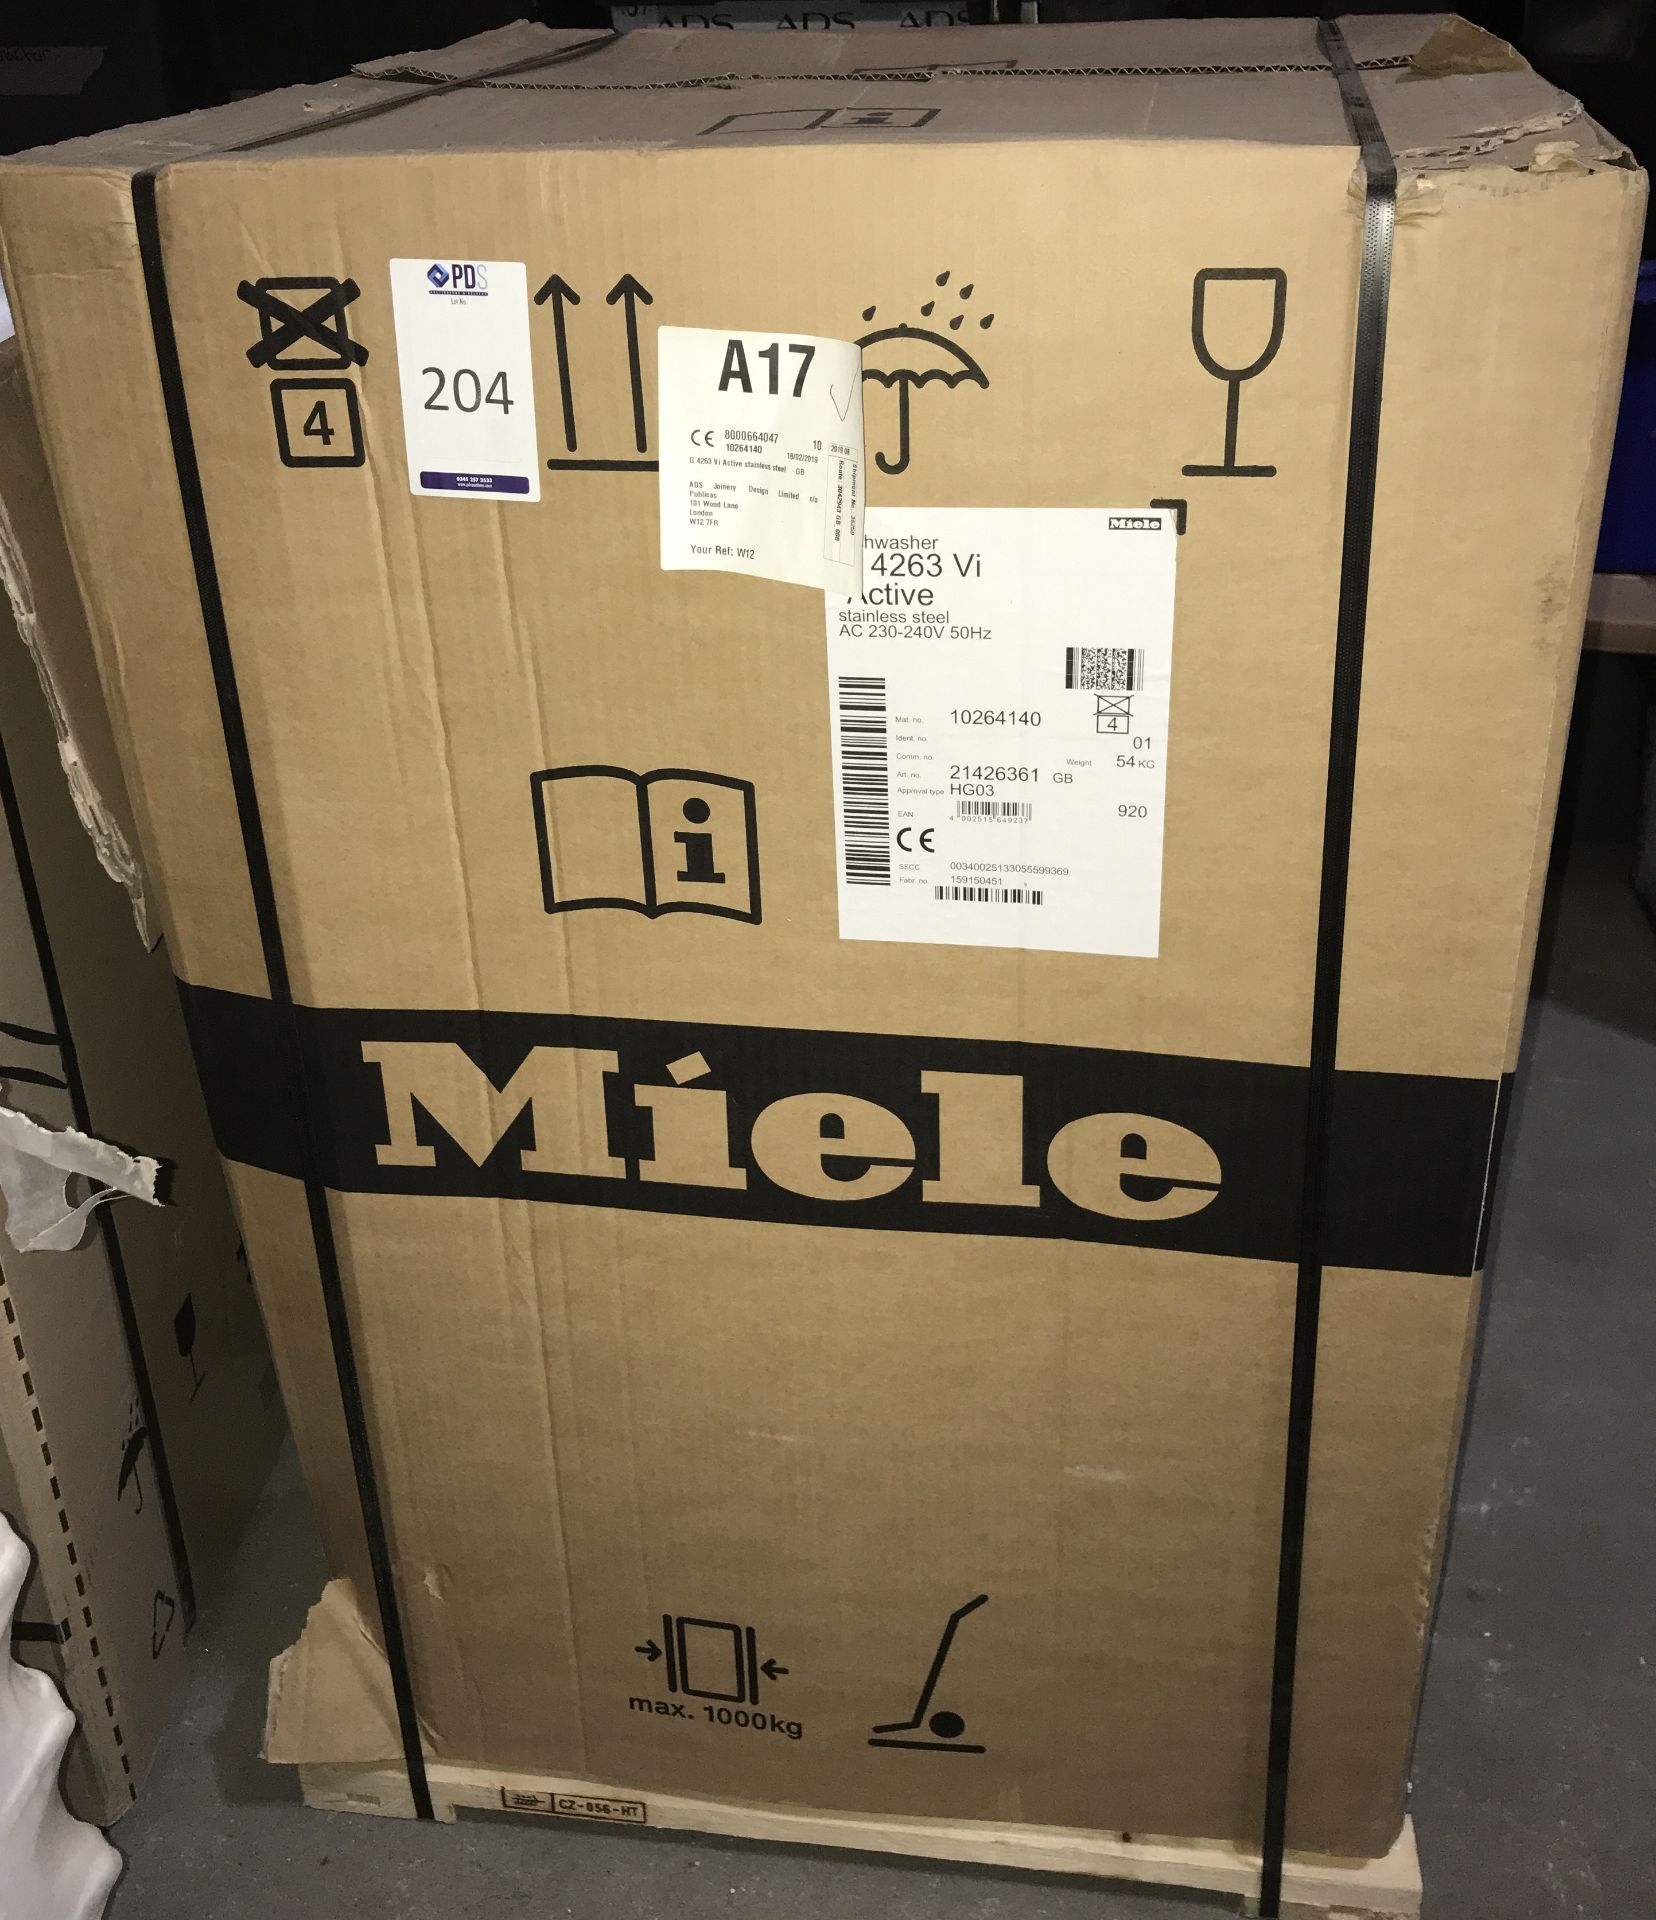 Miele G4263VI Active Stainless-Steel Dishwasher, 60 cm Wide (New Old Stock)